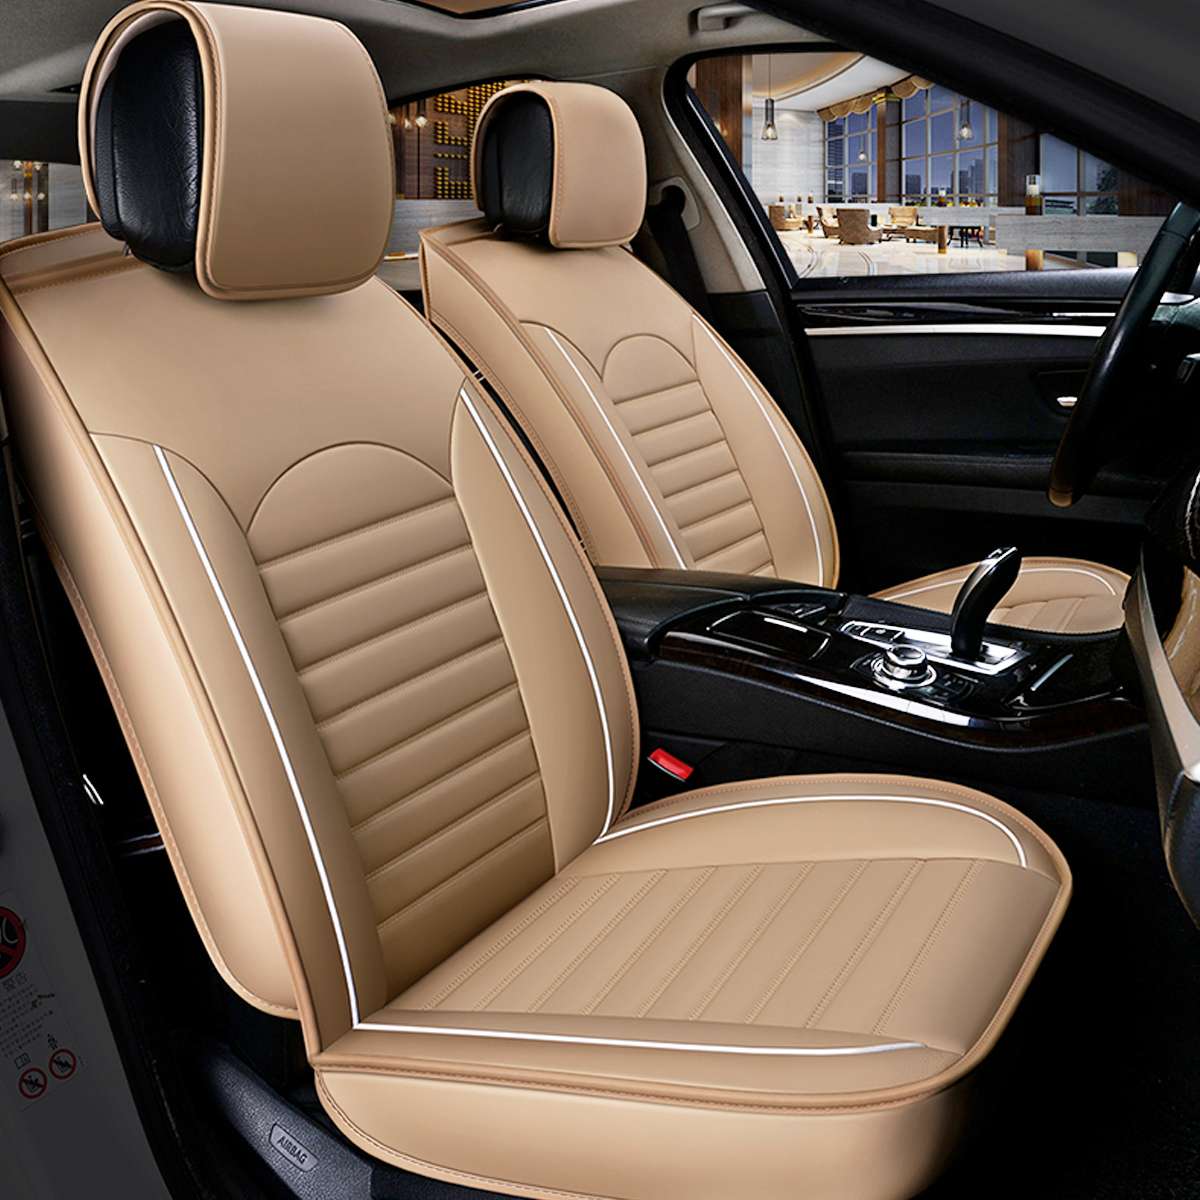 Universal Car Seat Cover PU Leather Automobile Seat Covers Car Seat Cover Vehicle Seat Protector Car Styling Interior Accessorie - Auto GoShop